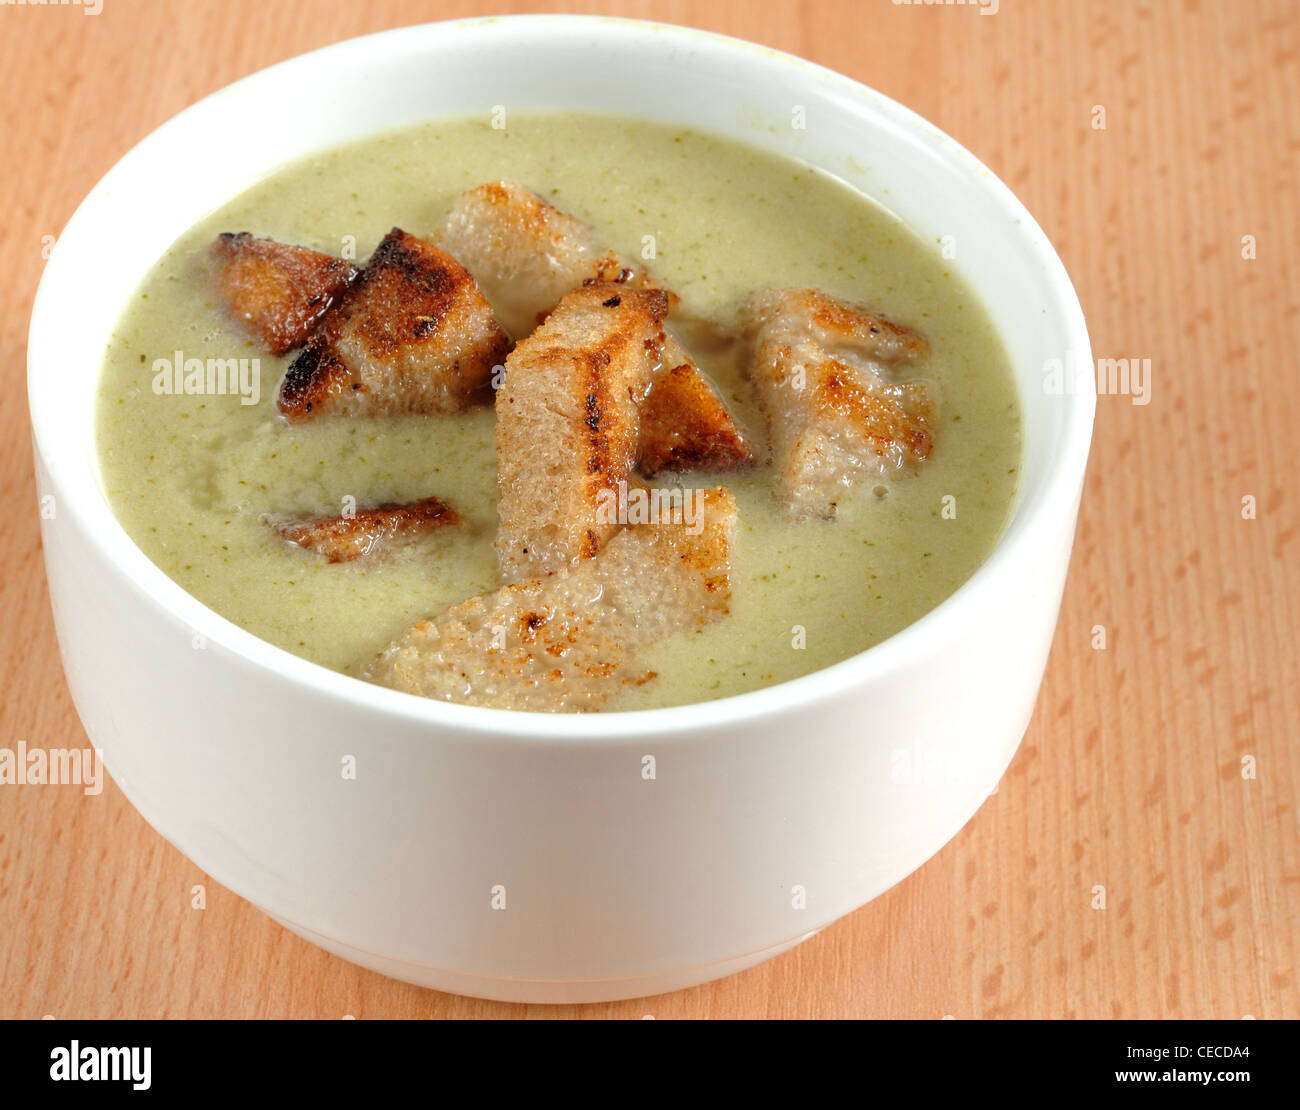 Broccoli cream soup with croutons  in a white dish on a wood table. Stock Photo